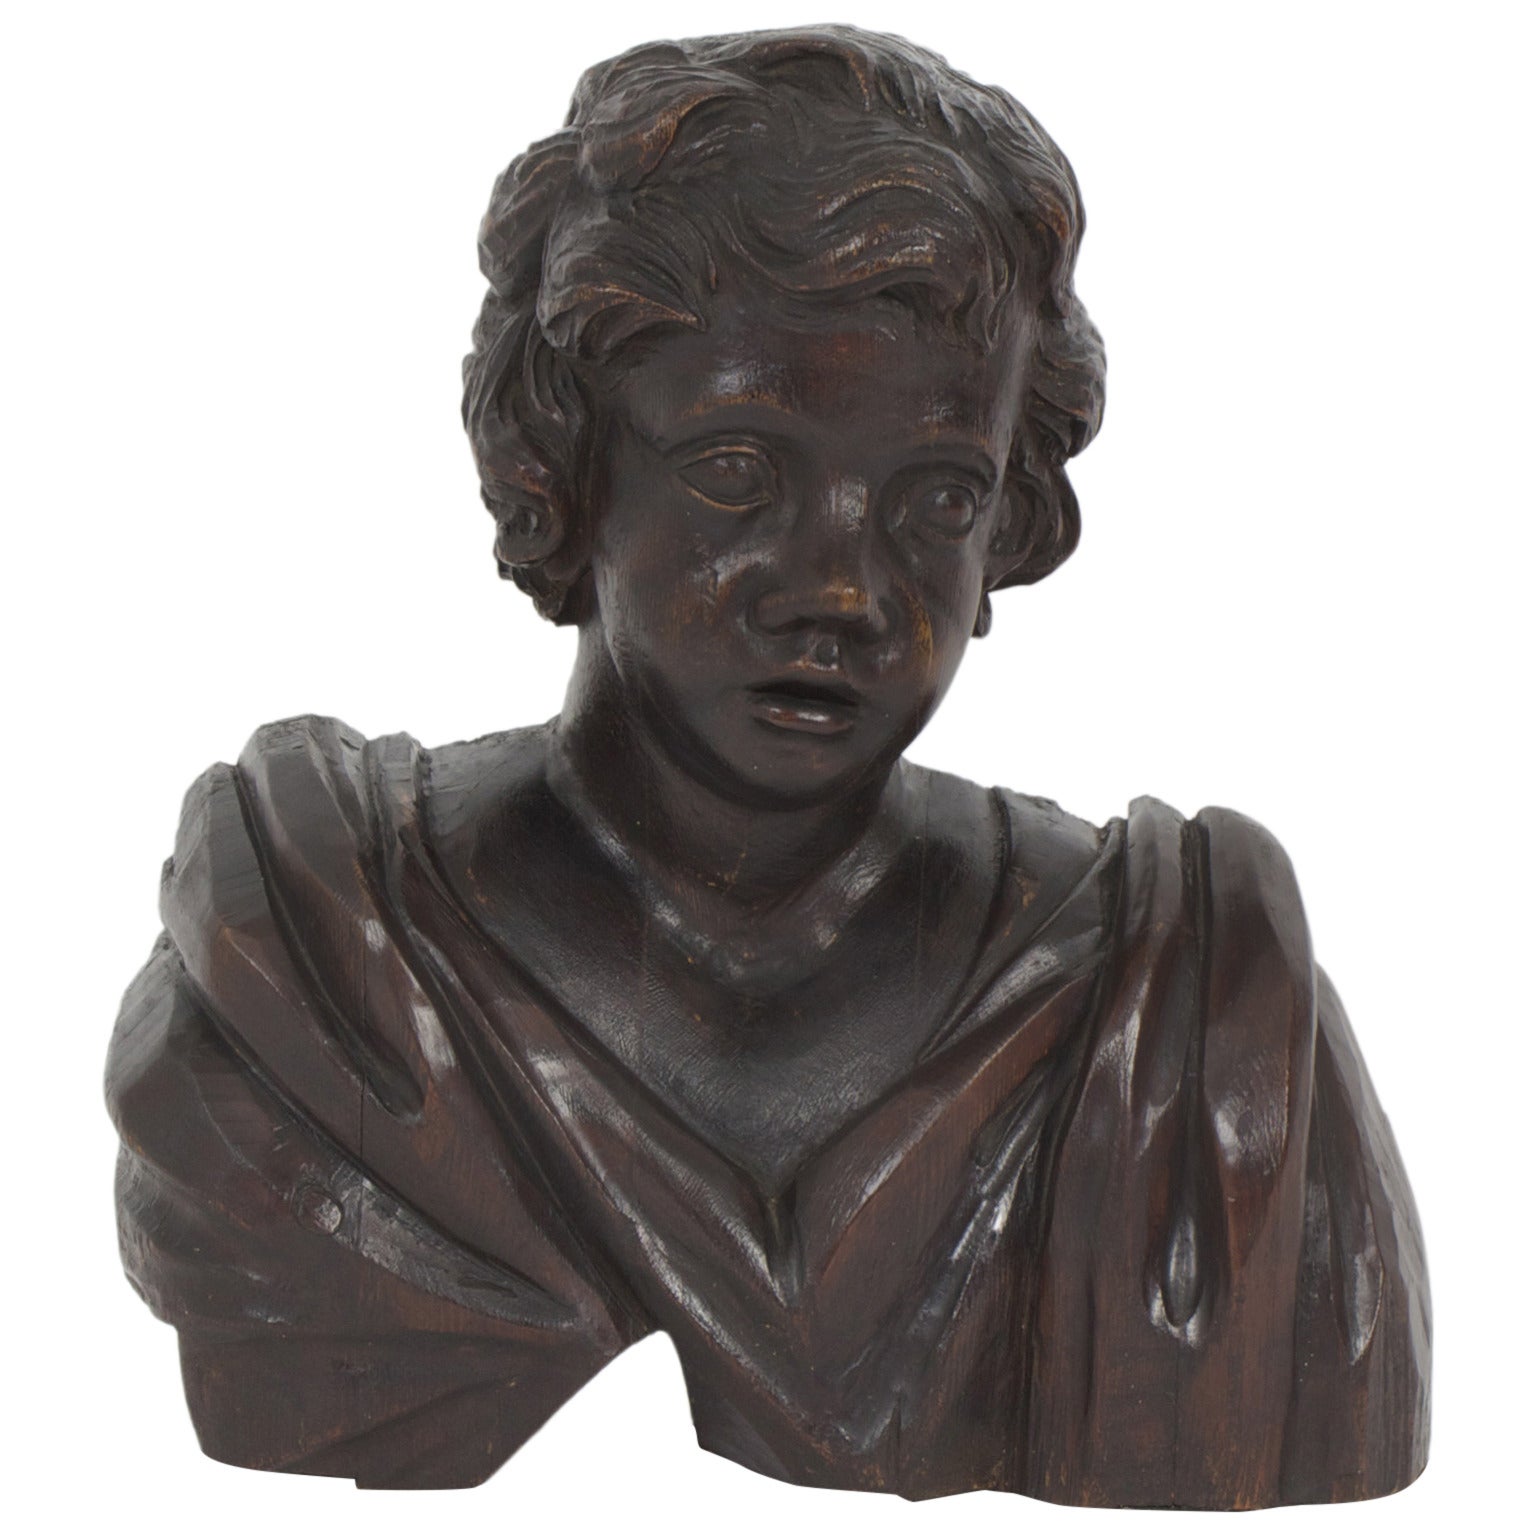 Antique, sculptural wood bust of a young woman or prepubescent child with a haunting, innocent expression. Displays as a wall mount or standing sculpture. Expertly carved hair, face and clothing and an over all dark, mellow mood, reminiscent of